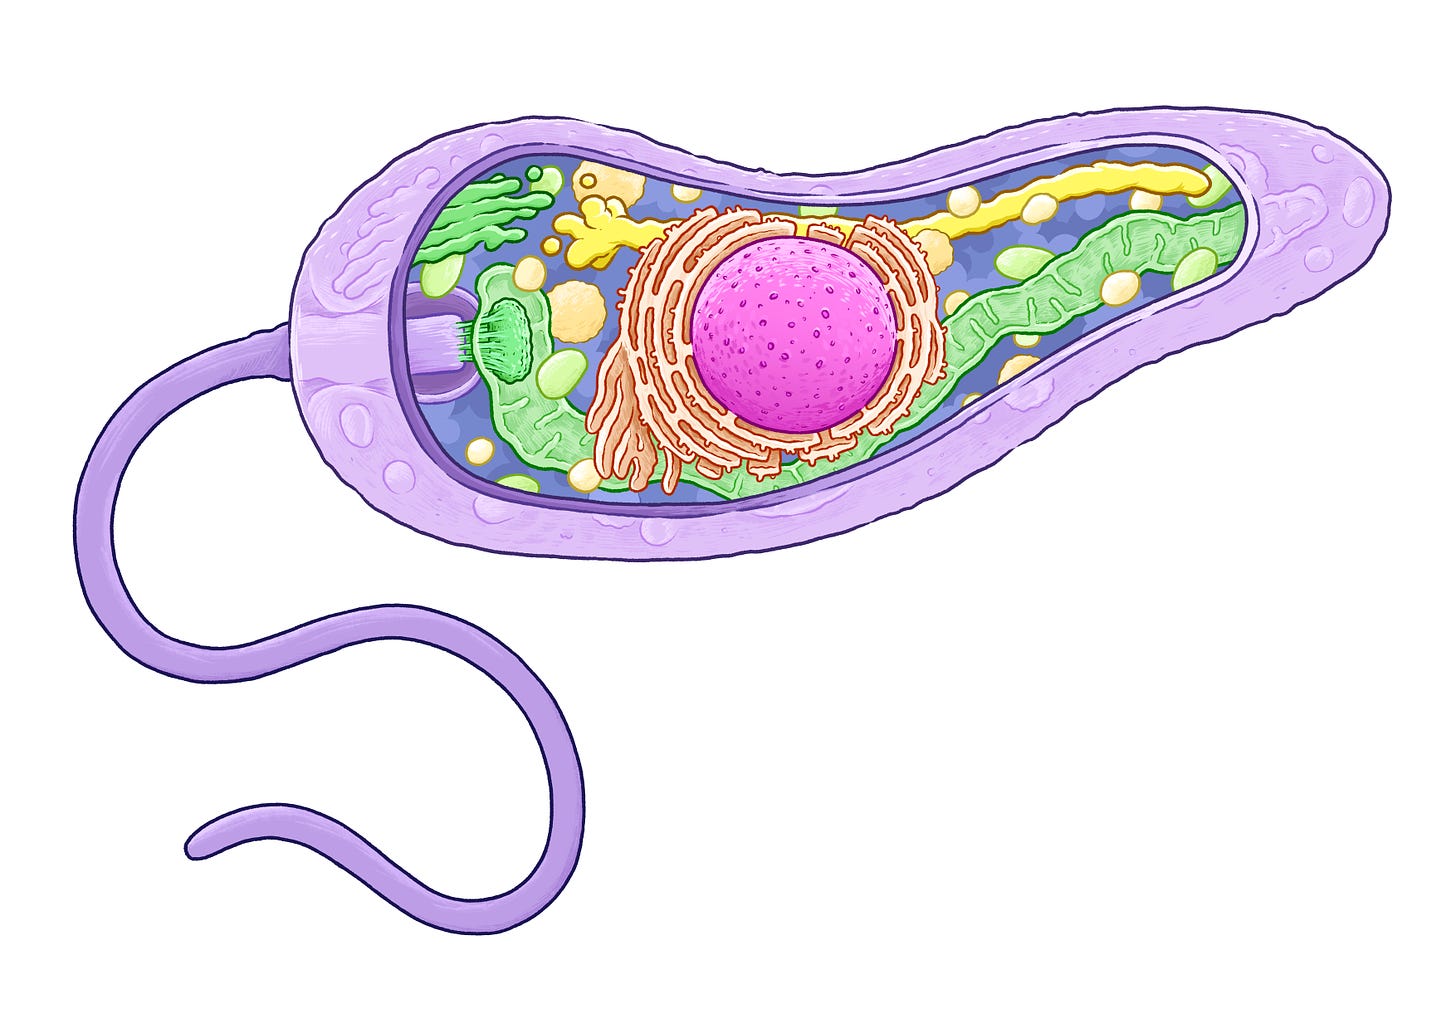 A colourful cut-away diagram of a leishmania parasite revealing the internal organelles of the single celled creature.